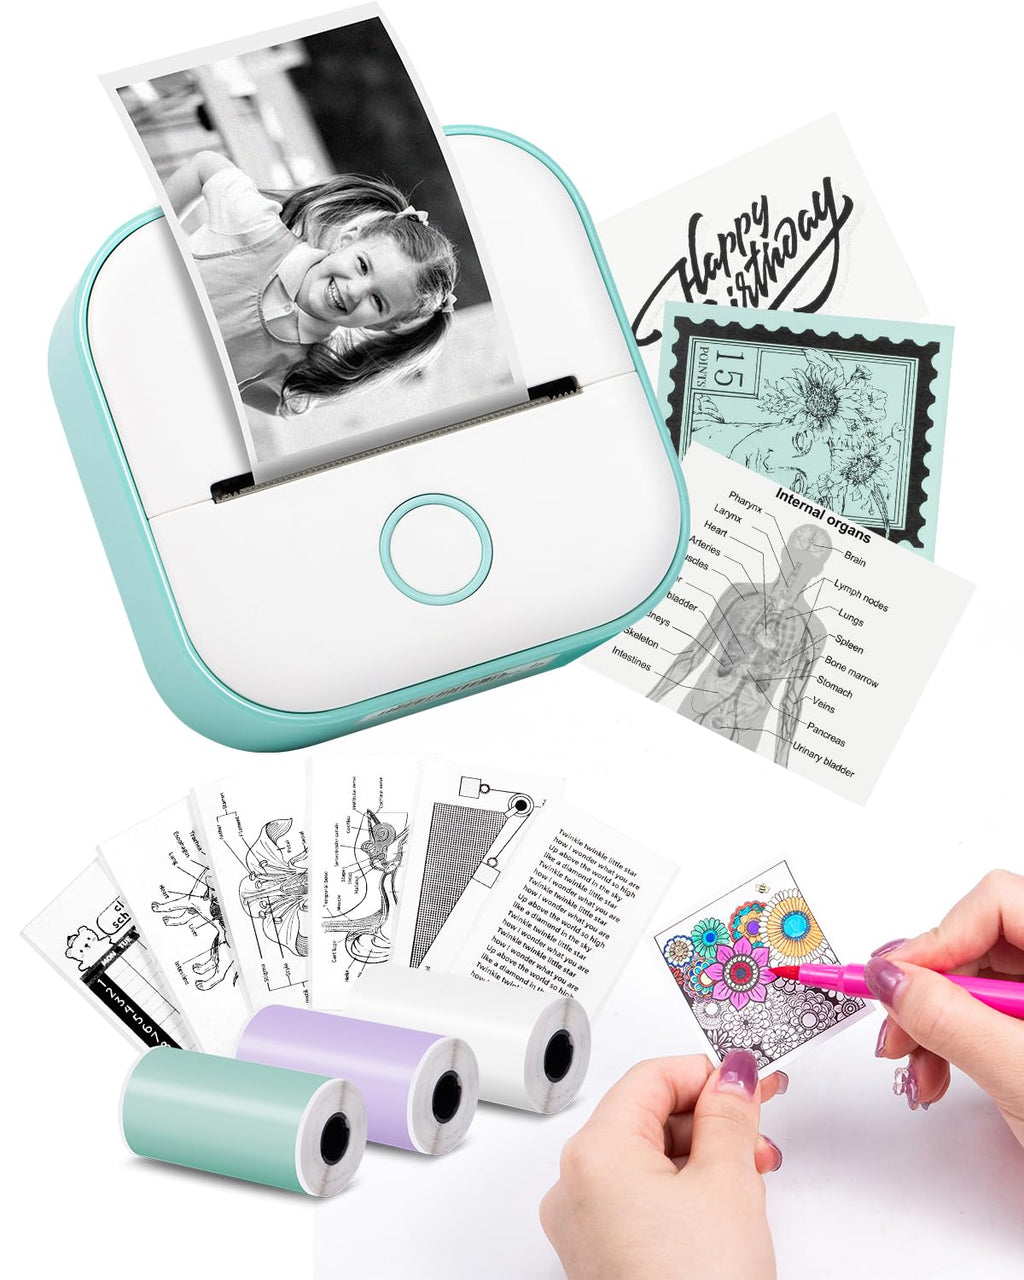 Mini Printer - T02 Label Maker with 3 Rolls Paper, Sticker Printer Machine, Inkless Portable Study Printer for Anatomical Diagram, Pictures, Journals, Receipts, Compatible with Phone & Tablet, Green 1 Printer + 3 Rolls Paper